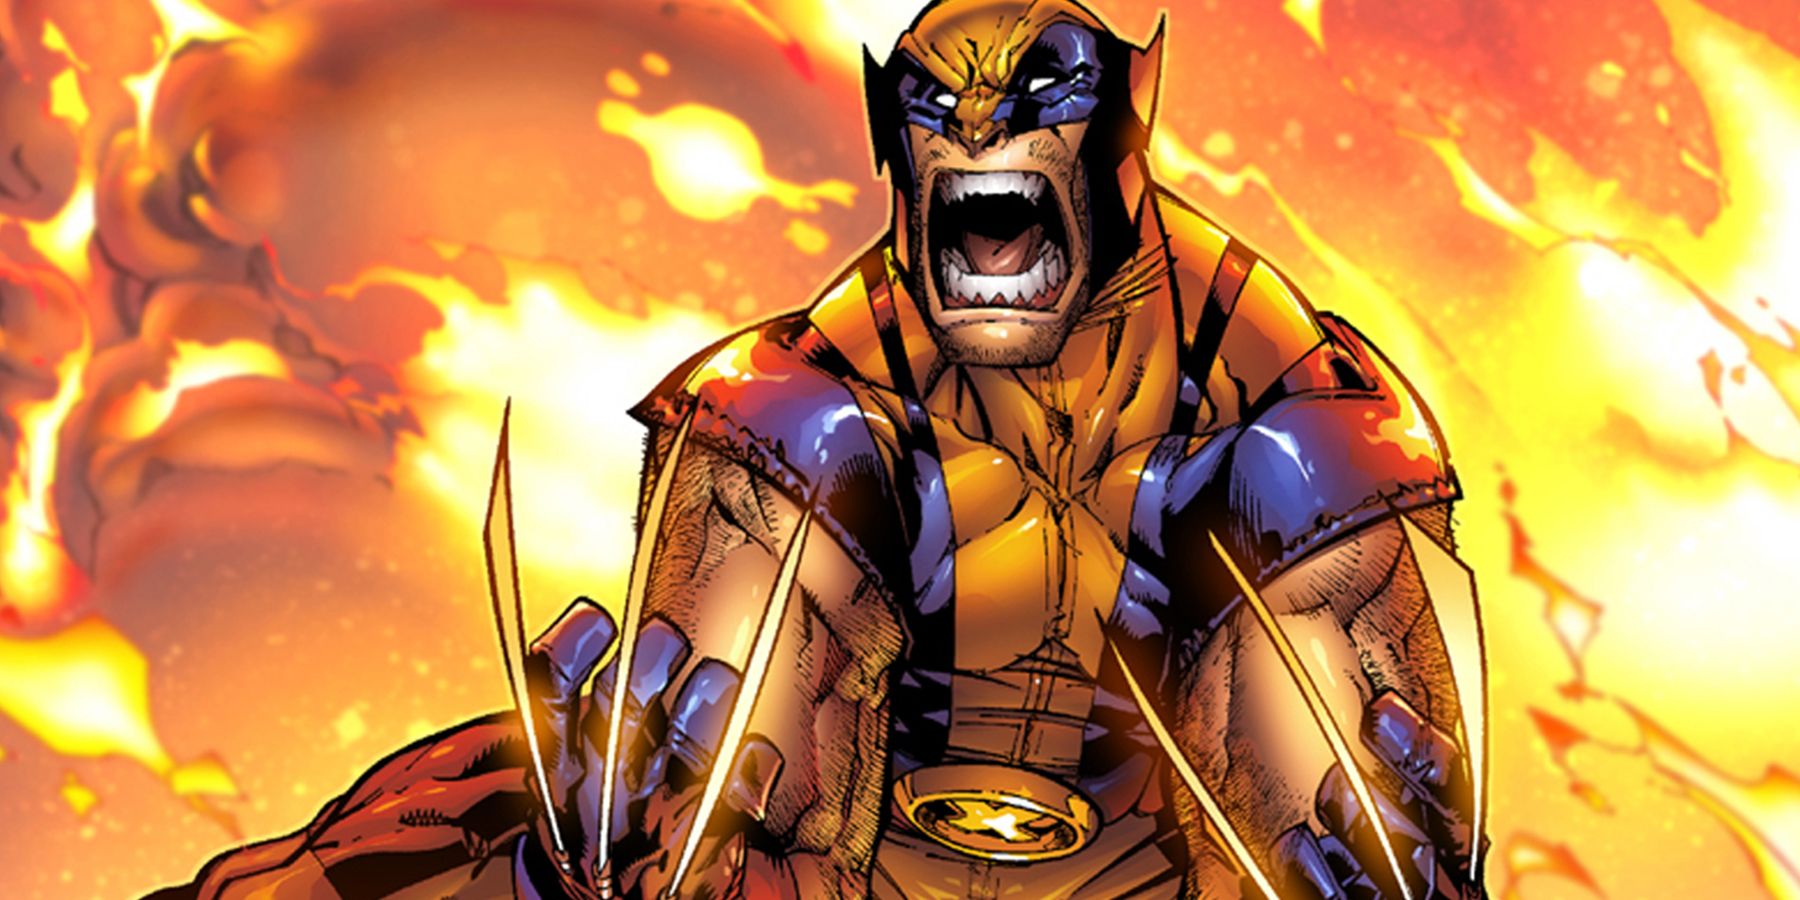 Wolverine surrounded by fire